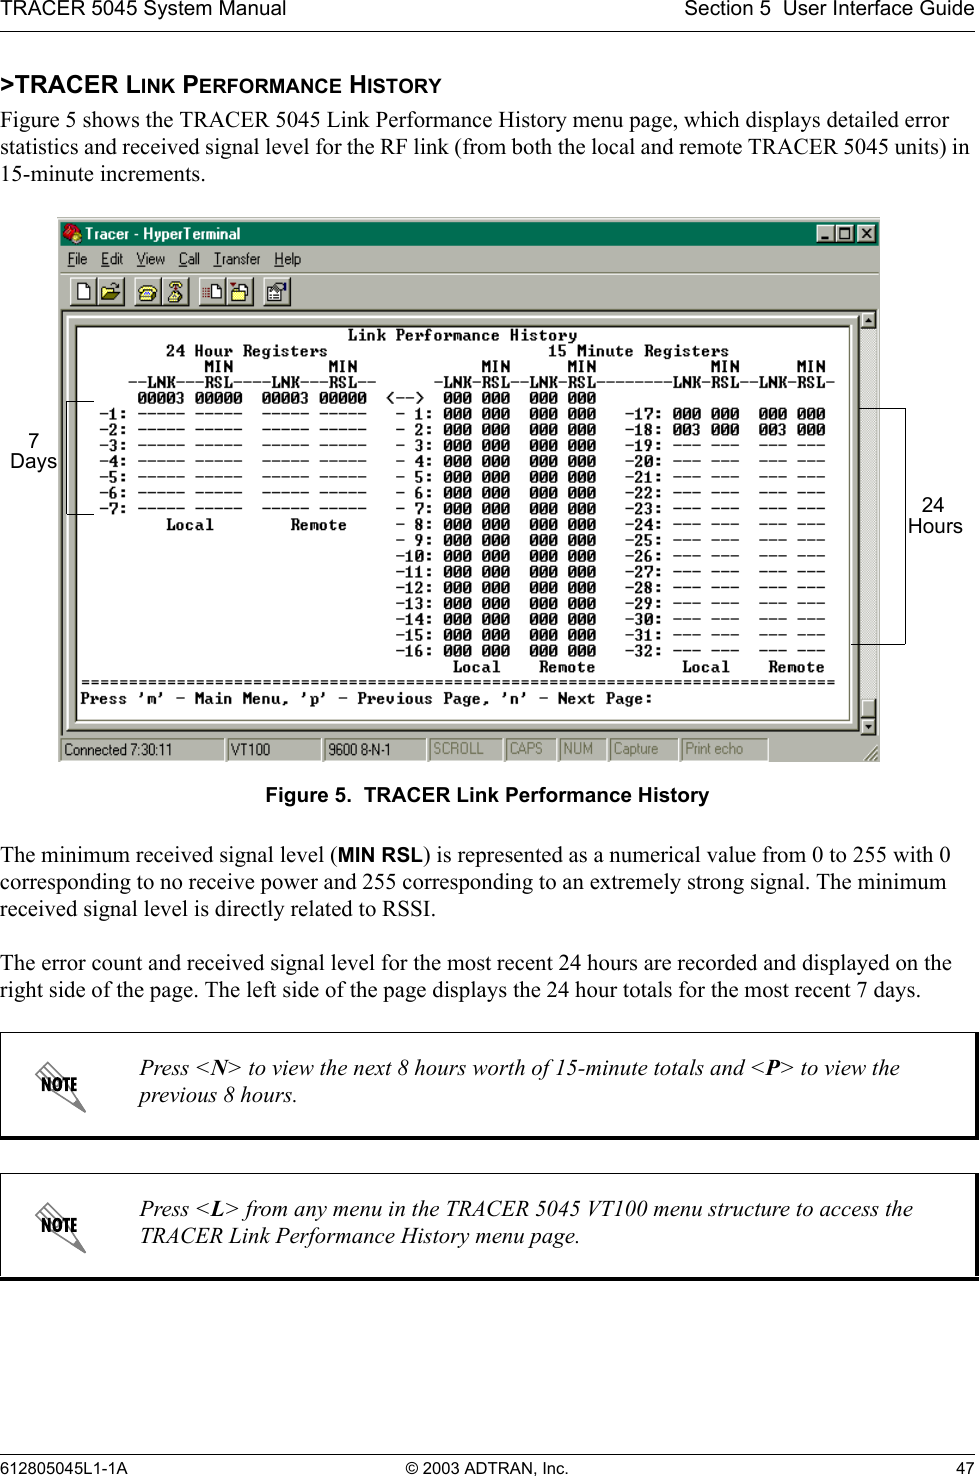 TRACER 5045 System Manual Section 5  User Interface Guide612805045L1-1A © 2003 ADTRAN, Inc. 47&gt;TRACER LINK PERFORMANCE HISTORYFigure 5 shows the TRACER 5045 Link Performance History menu page, which displays detailed error statistics and received signal level for the RF link (from both the local and remote TRACER 5045 units) in 15-minute increments. Figure 5.  TRACER Link Performance HistoryThe minimum received signal level (MIN RSL) is represented as a numerical value from 0 to 255 with 0 corresponding to no receive power and 255 corresponding to an extremely strong signal. The minimum received signal level is directly related to RSSI.The error count and received signal level for the most recent 24 hours are recorded and displayed on the right side of the page. The left side of the page displays the 24 hour totals for the most recent 7 days. Press &lt;N&gt; to view the next 8 hours worth of 15-minute totals and &lt;P&gt; to view the previous 8 hours.Press &lt;L&gt; from any menu in the TRACER 5045 VT100 menu structure to access the TRACER Link Performance History menu page.24 Hours7 Days